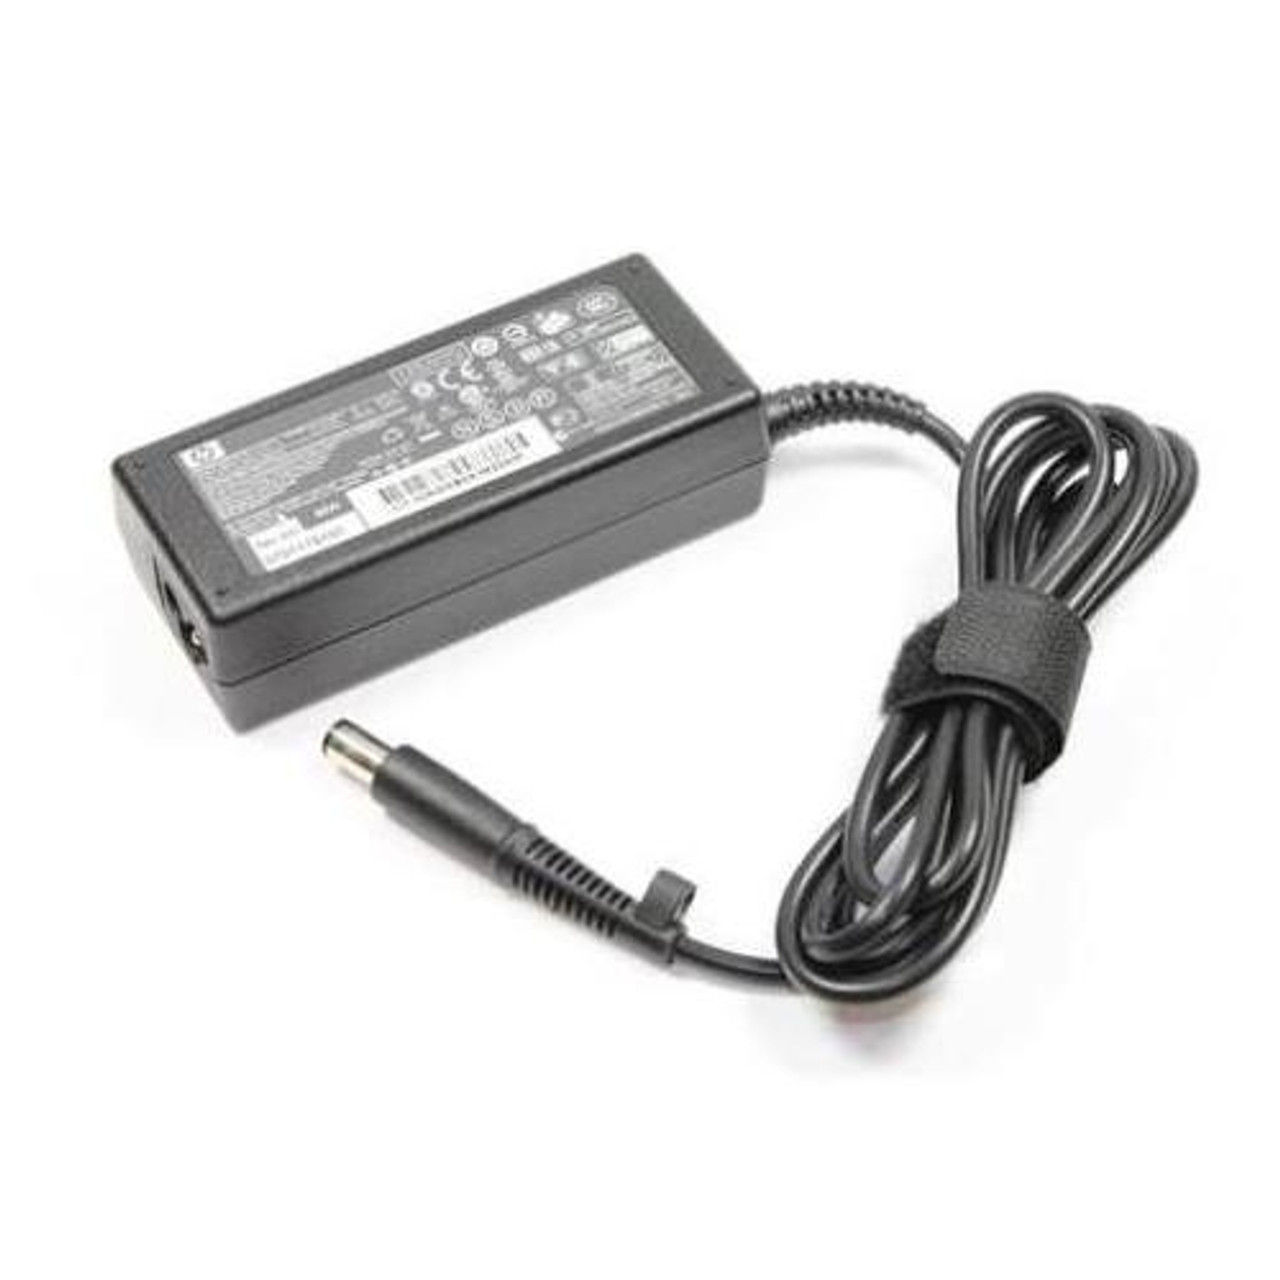 0950-2372 HP AC Adapter for JetDirect EX 5V DC at 1Amp Max Output